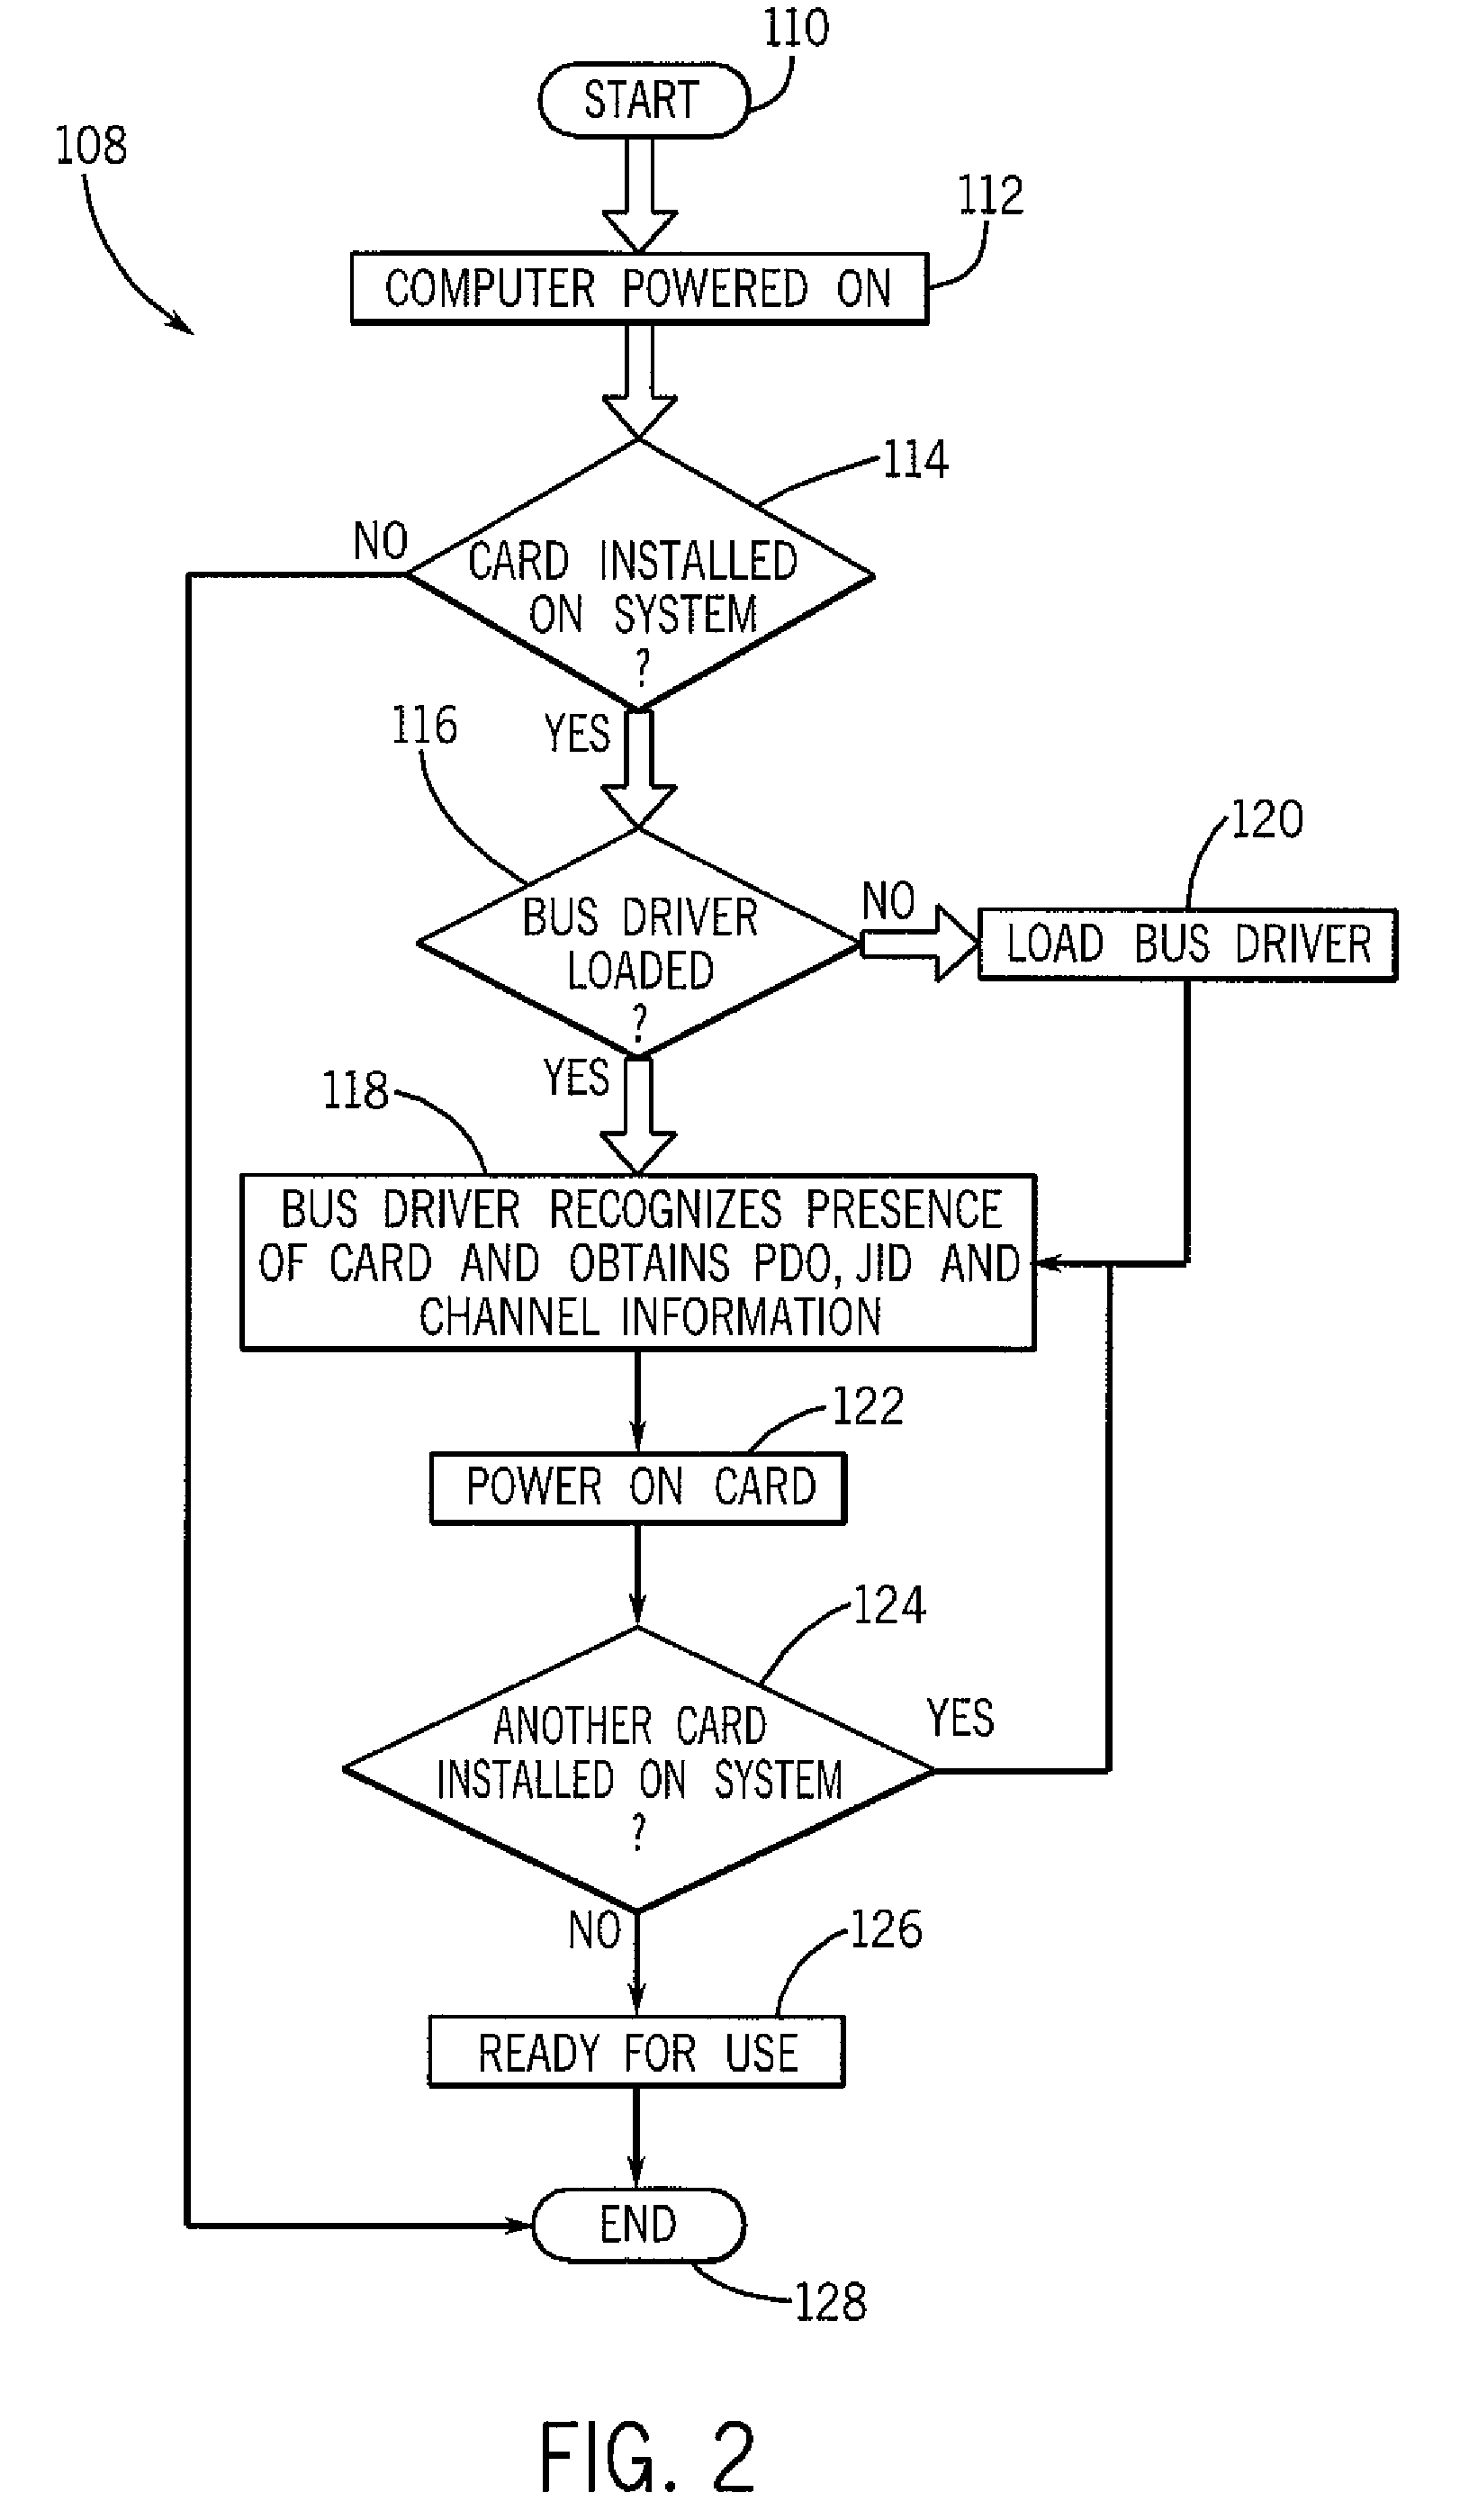 System and method for implementing and/or operating network interface devices to achieve network-based communications